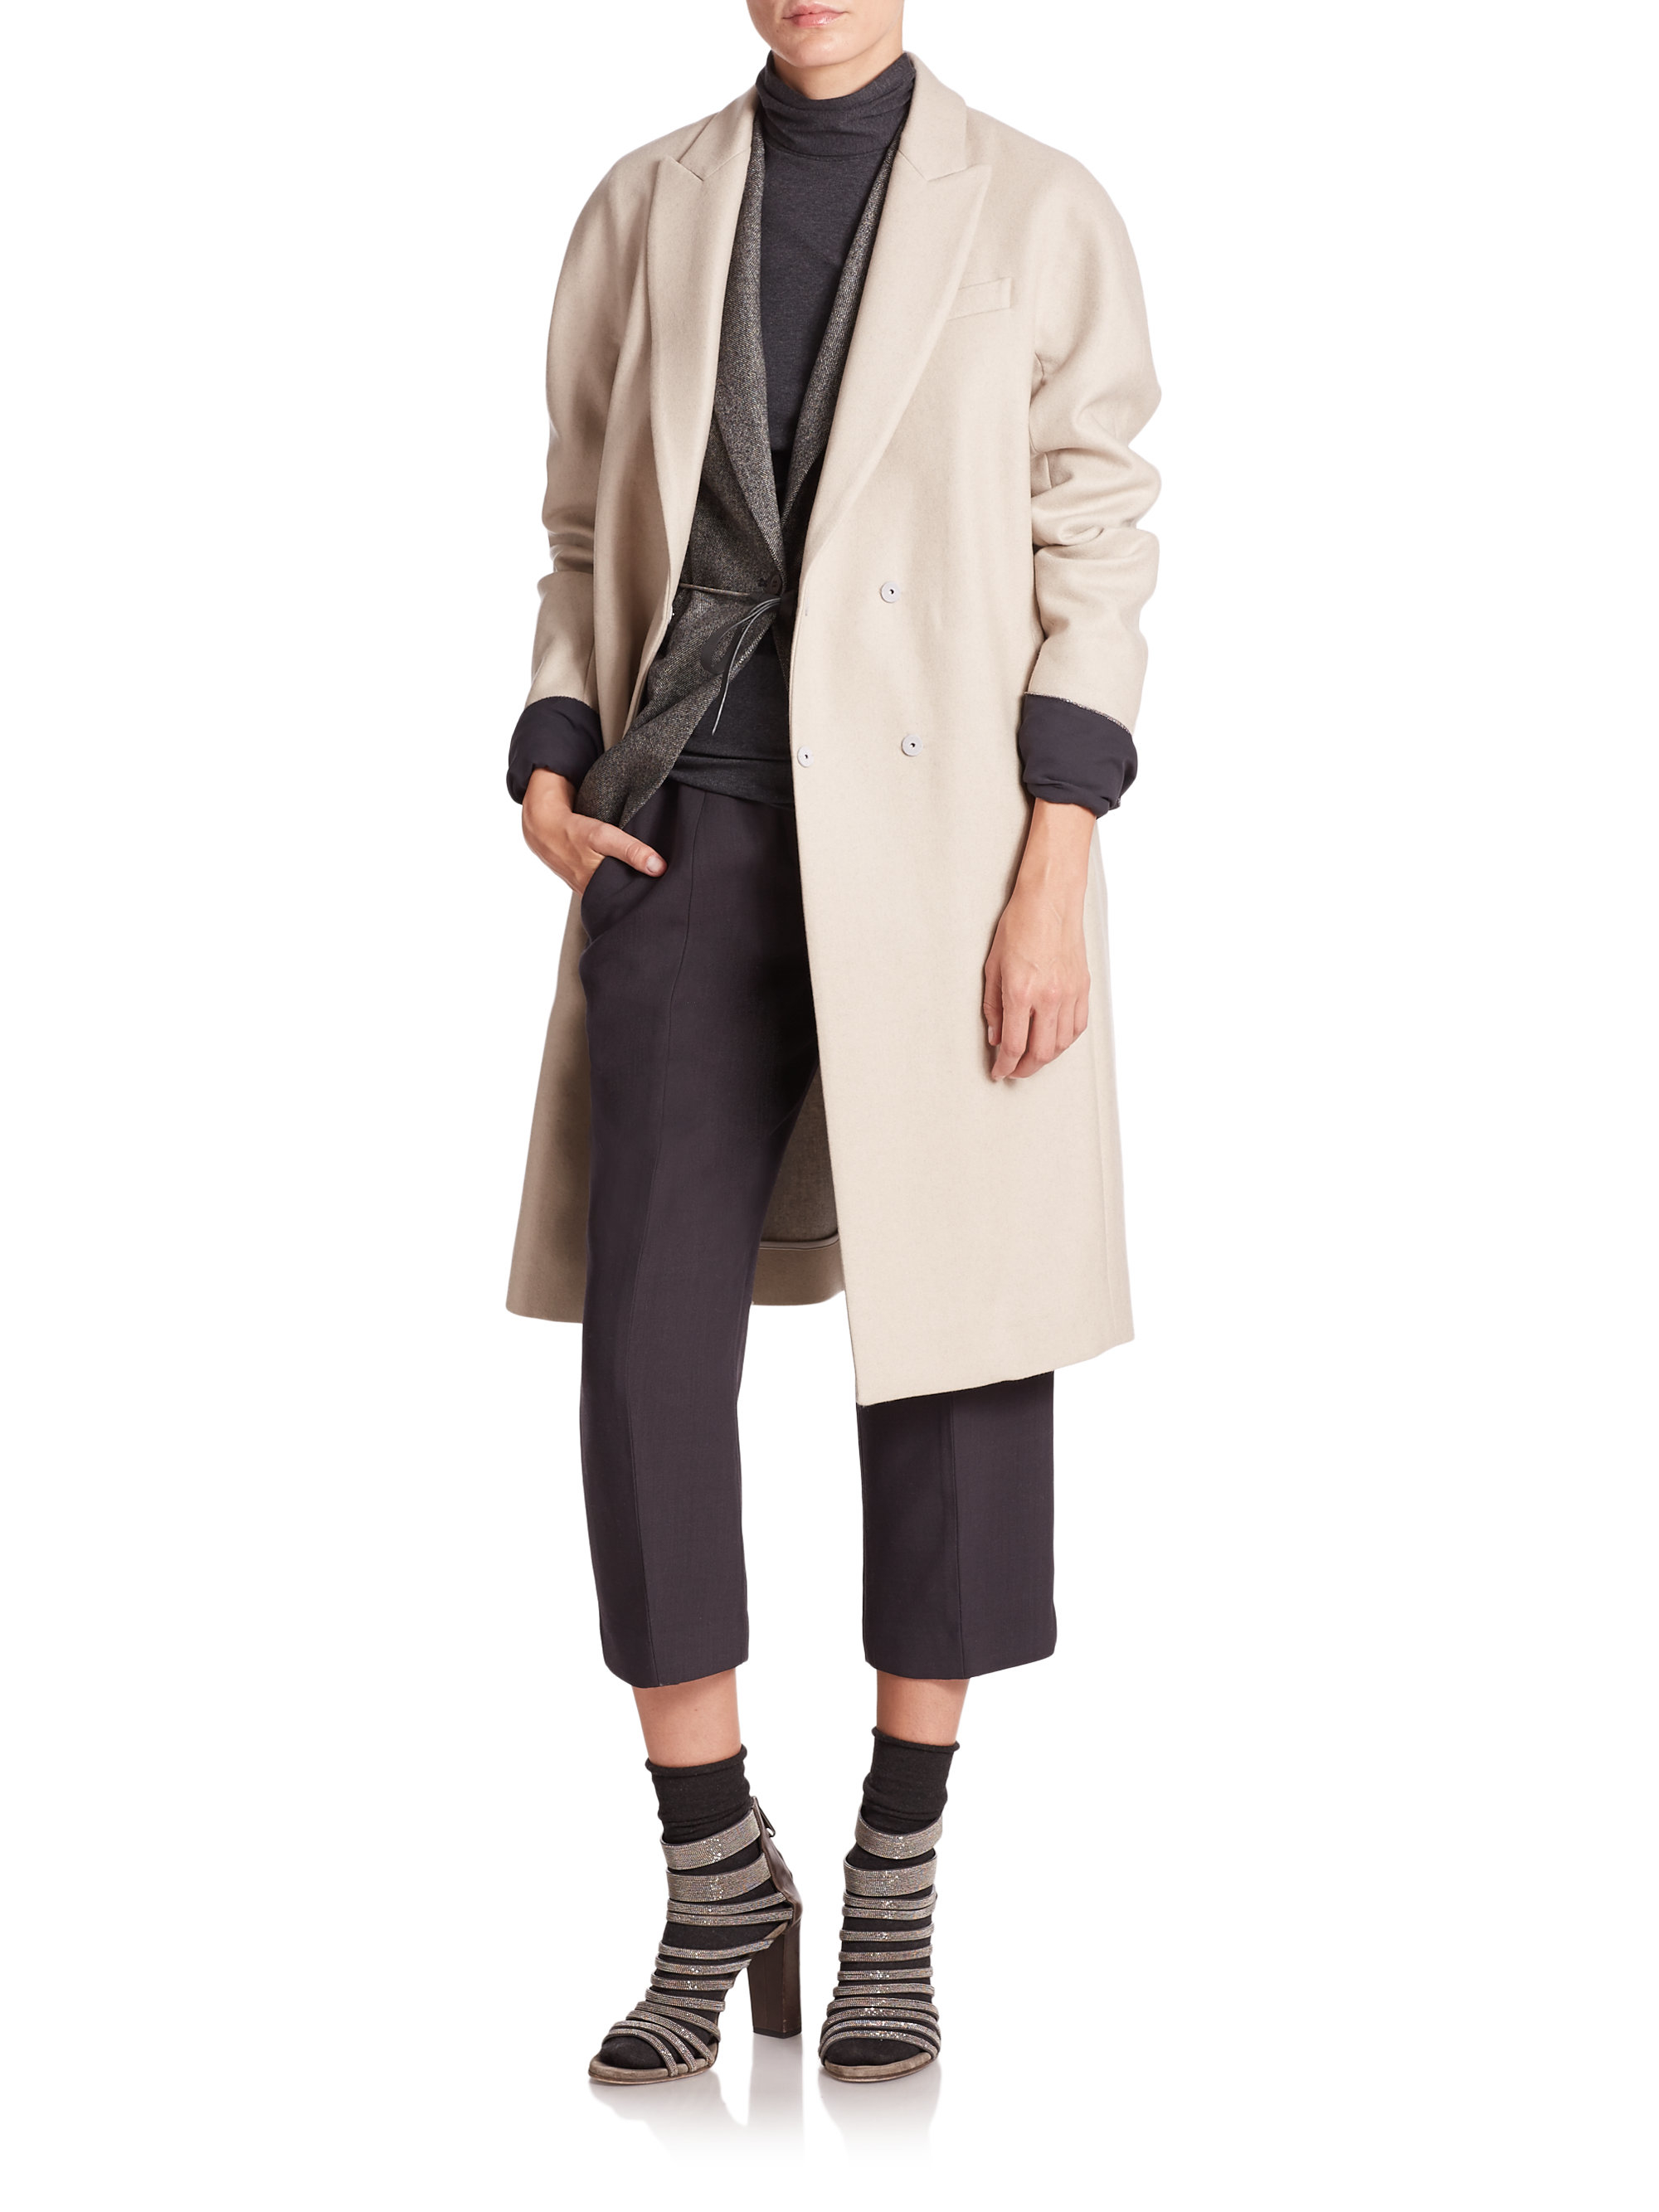 Lyst - Brunello Cucinelli Double-faced Cashmere Coat in Natural